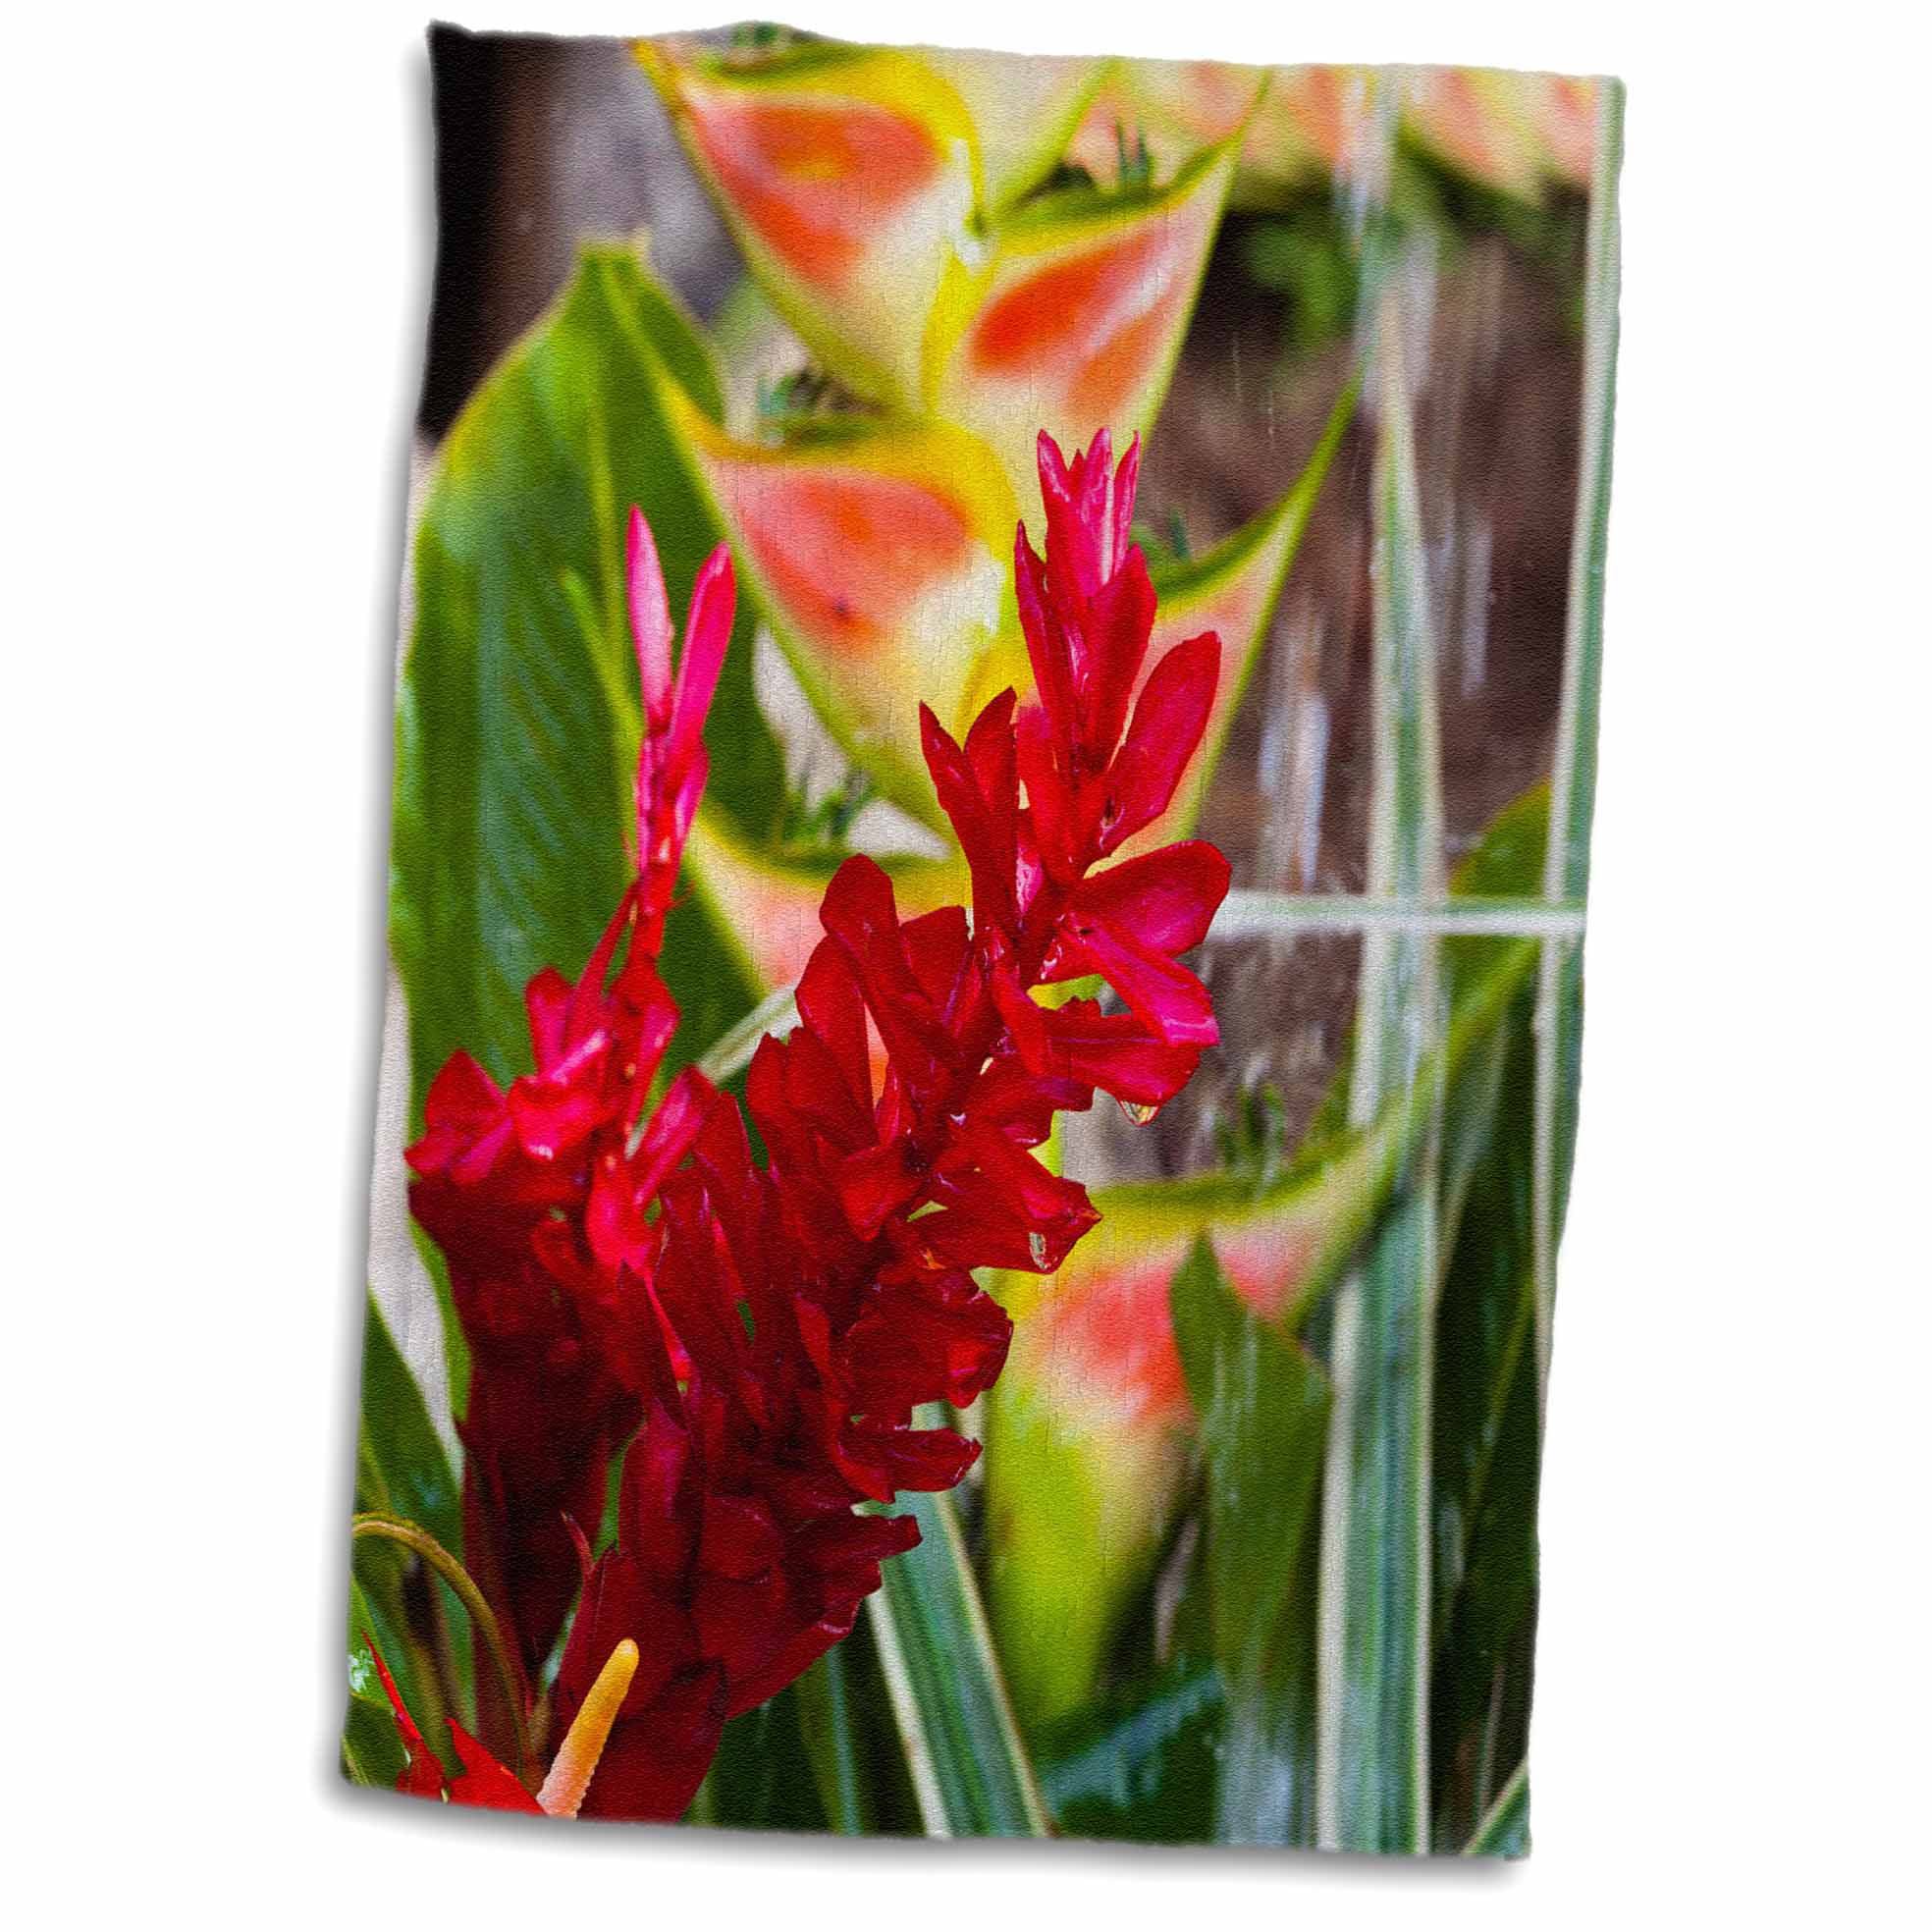 Heliconia red Ginger flowers-CA13 WBI0058-Walter Bibikow Towel 15 x 22 3dRose Dominica Roseau